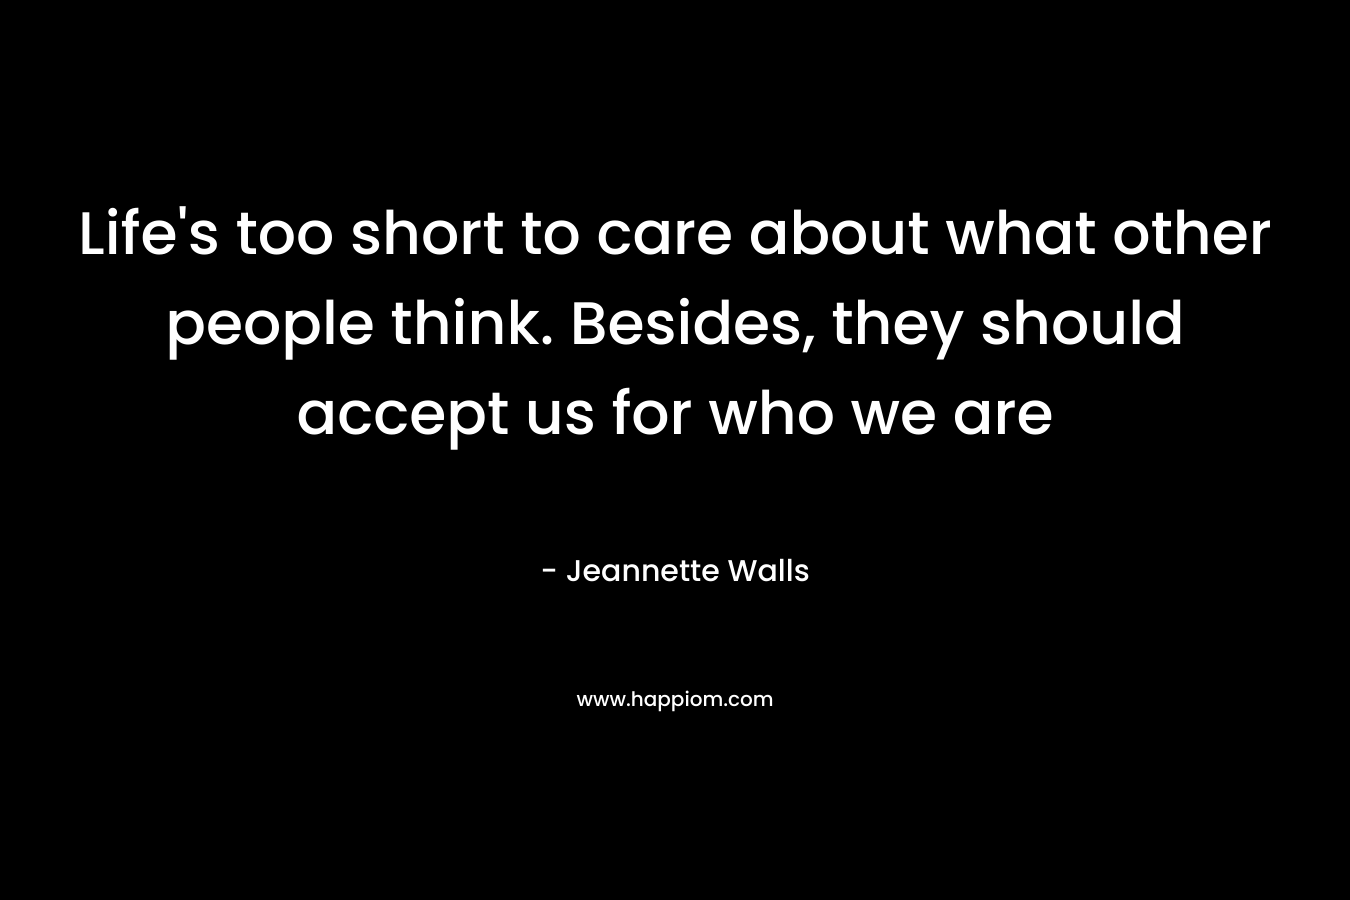 Life's too short to care about what other people think. Besides, they should accept us for who we are